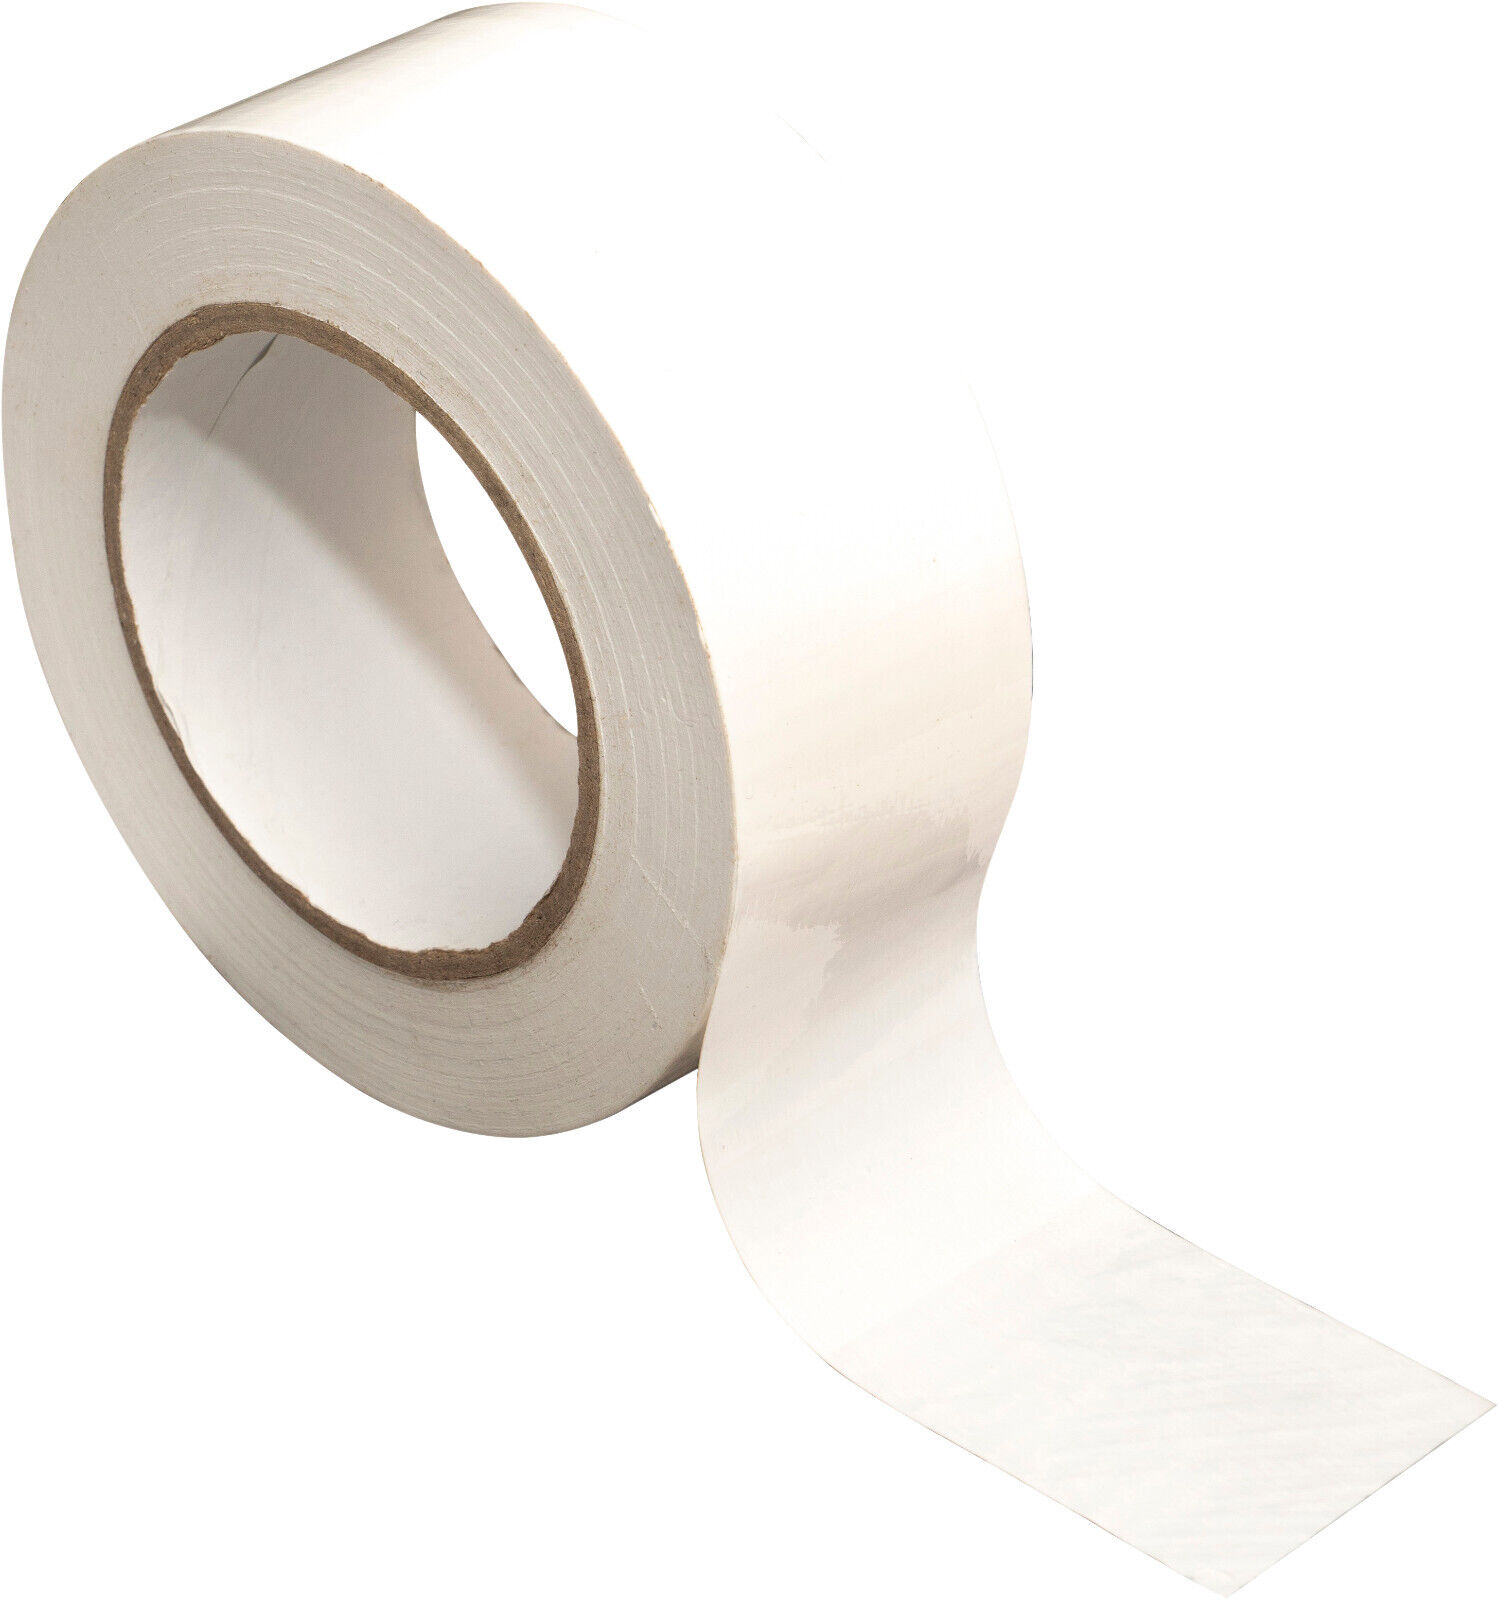 General Purpose Duct Tape 50mm x 50m White